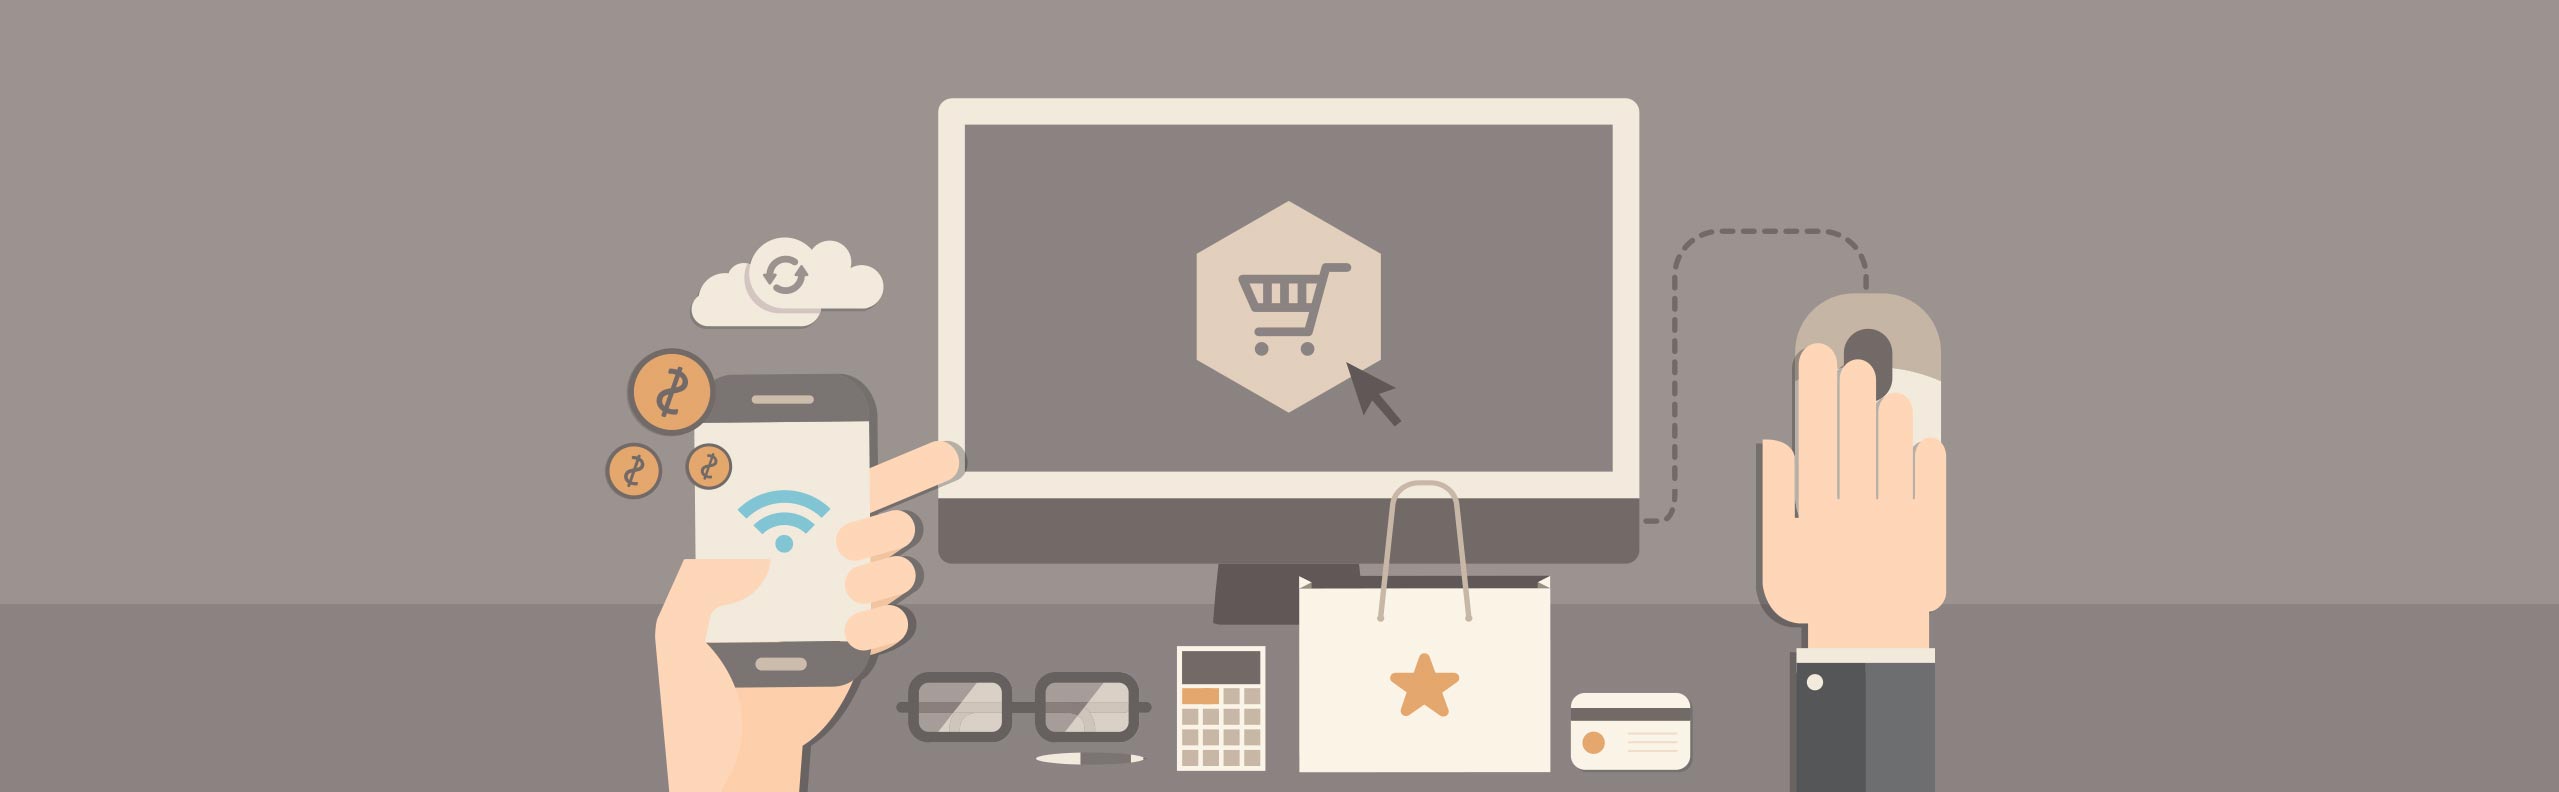 Top 25 SEO Tips for Ecommerce Websites